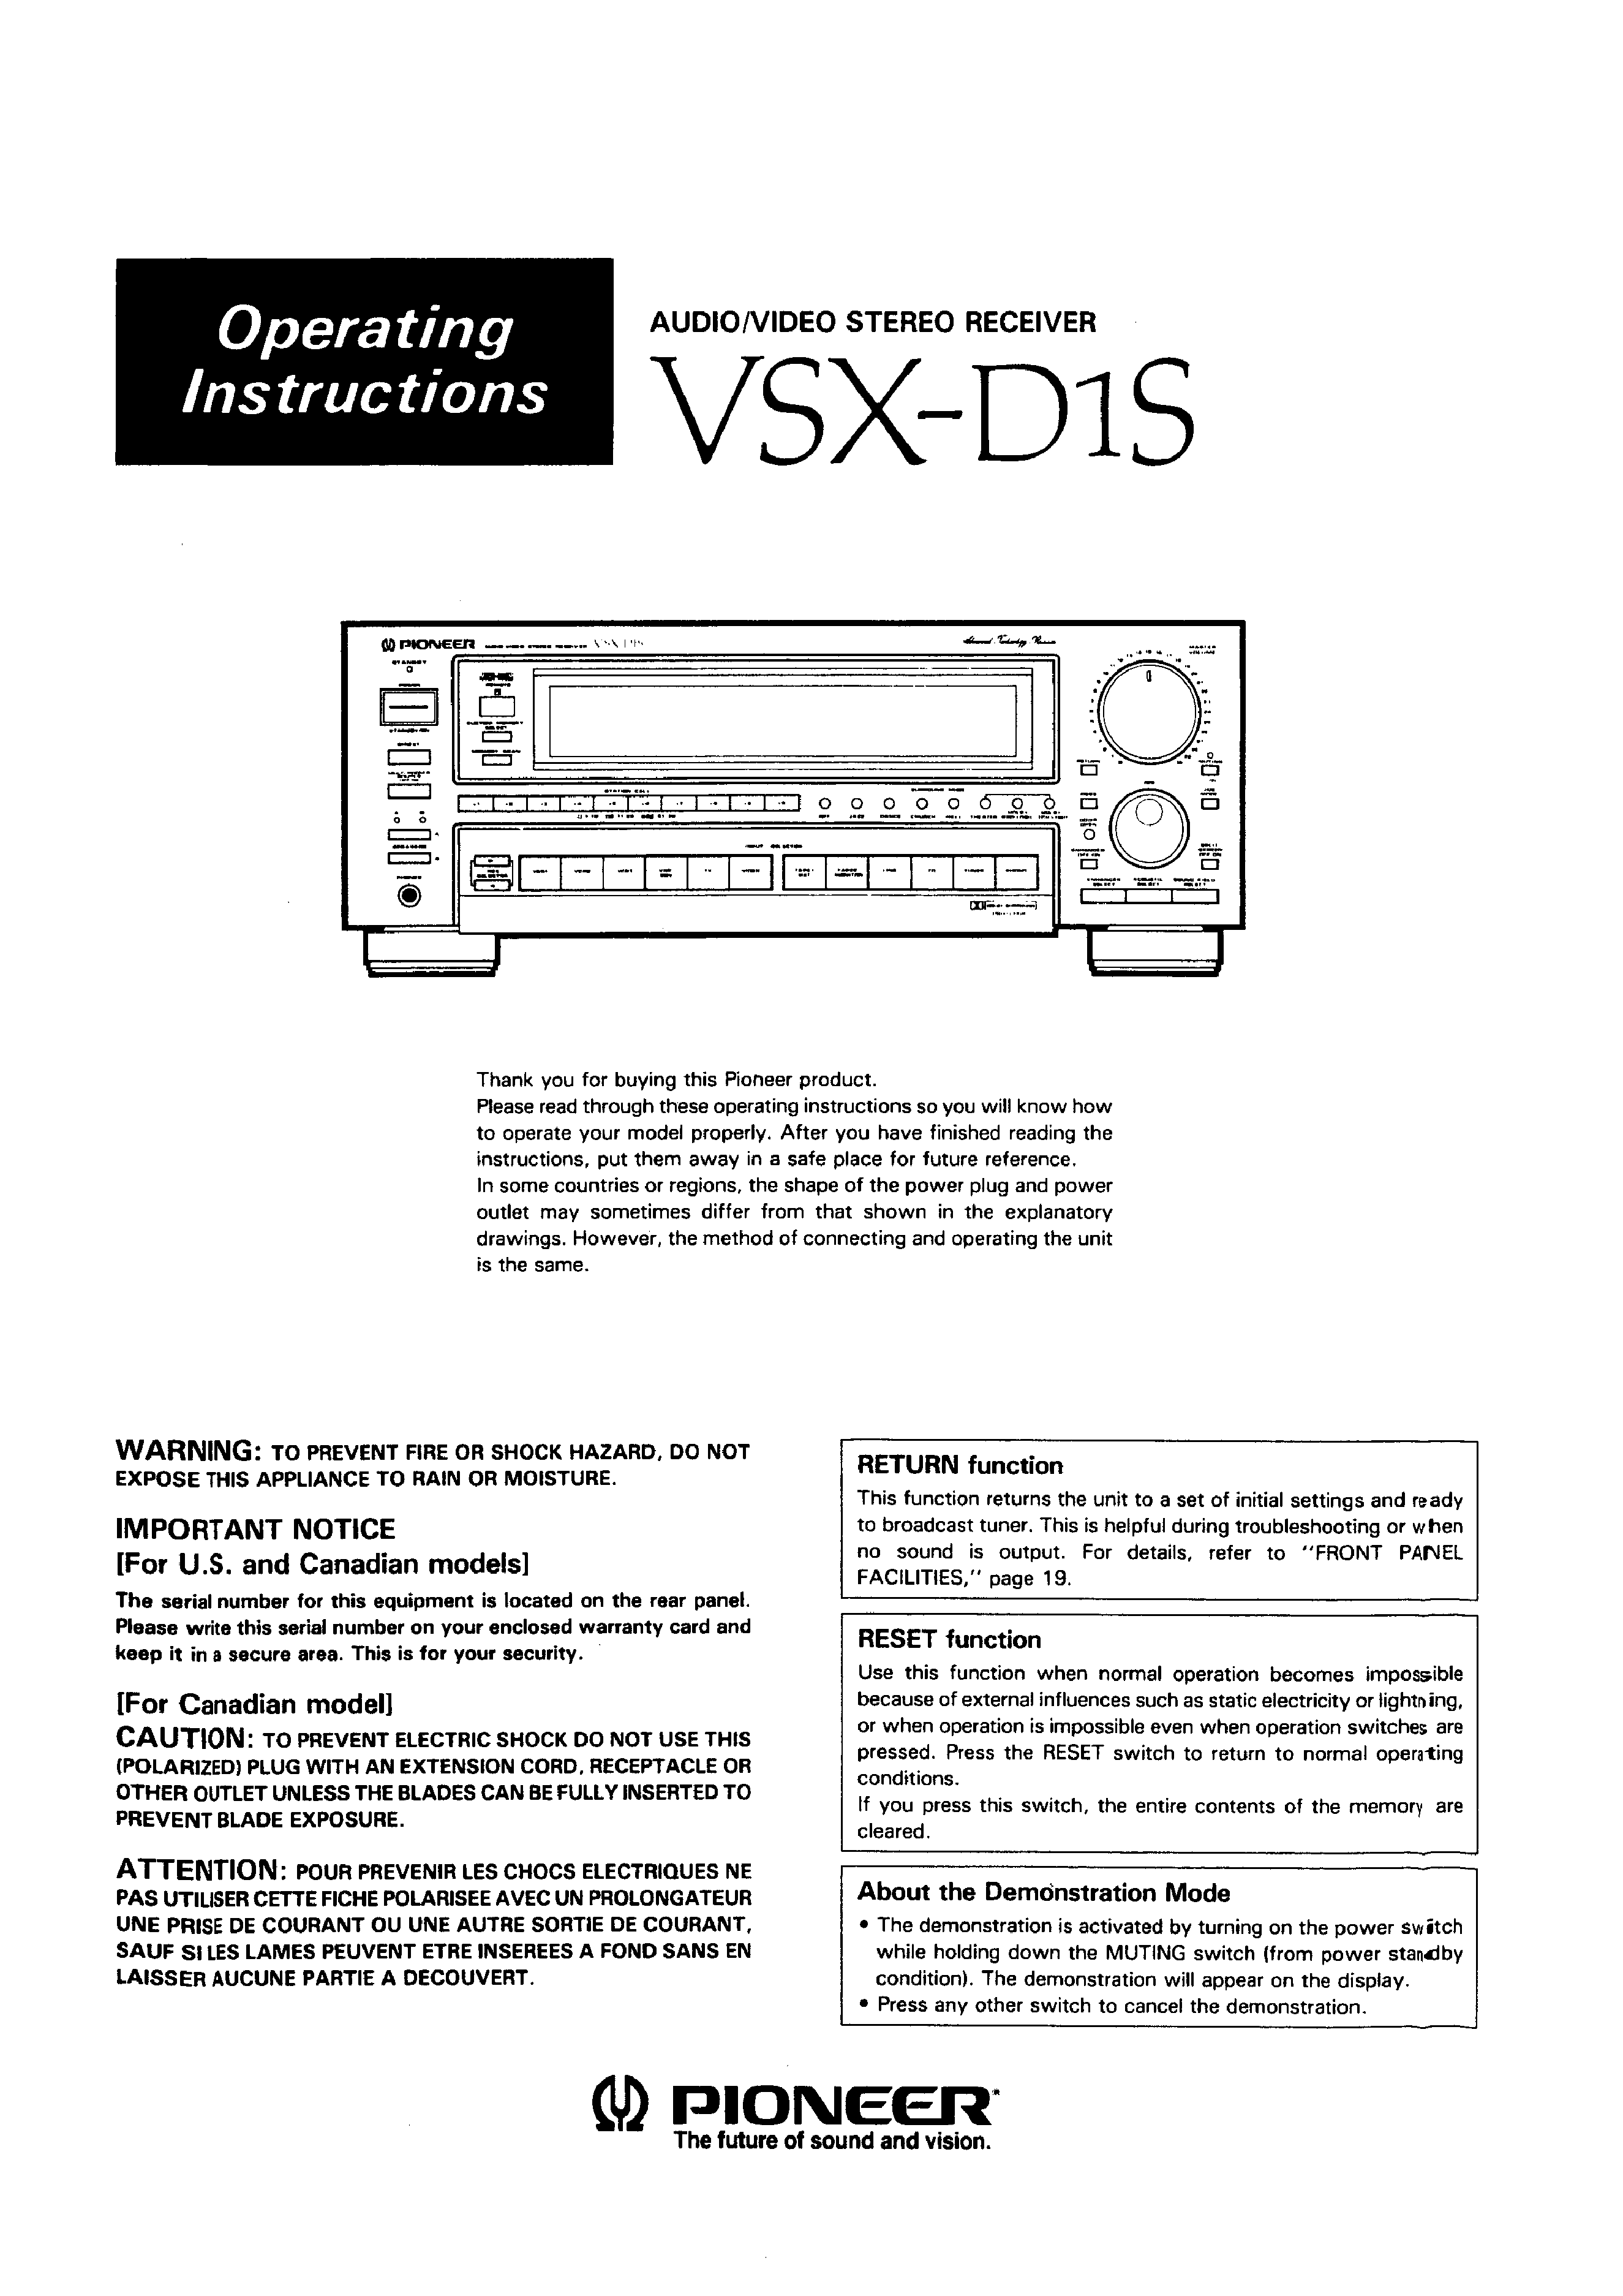 Owner's Manual for PIONEER VSX-D1S - Download